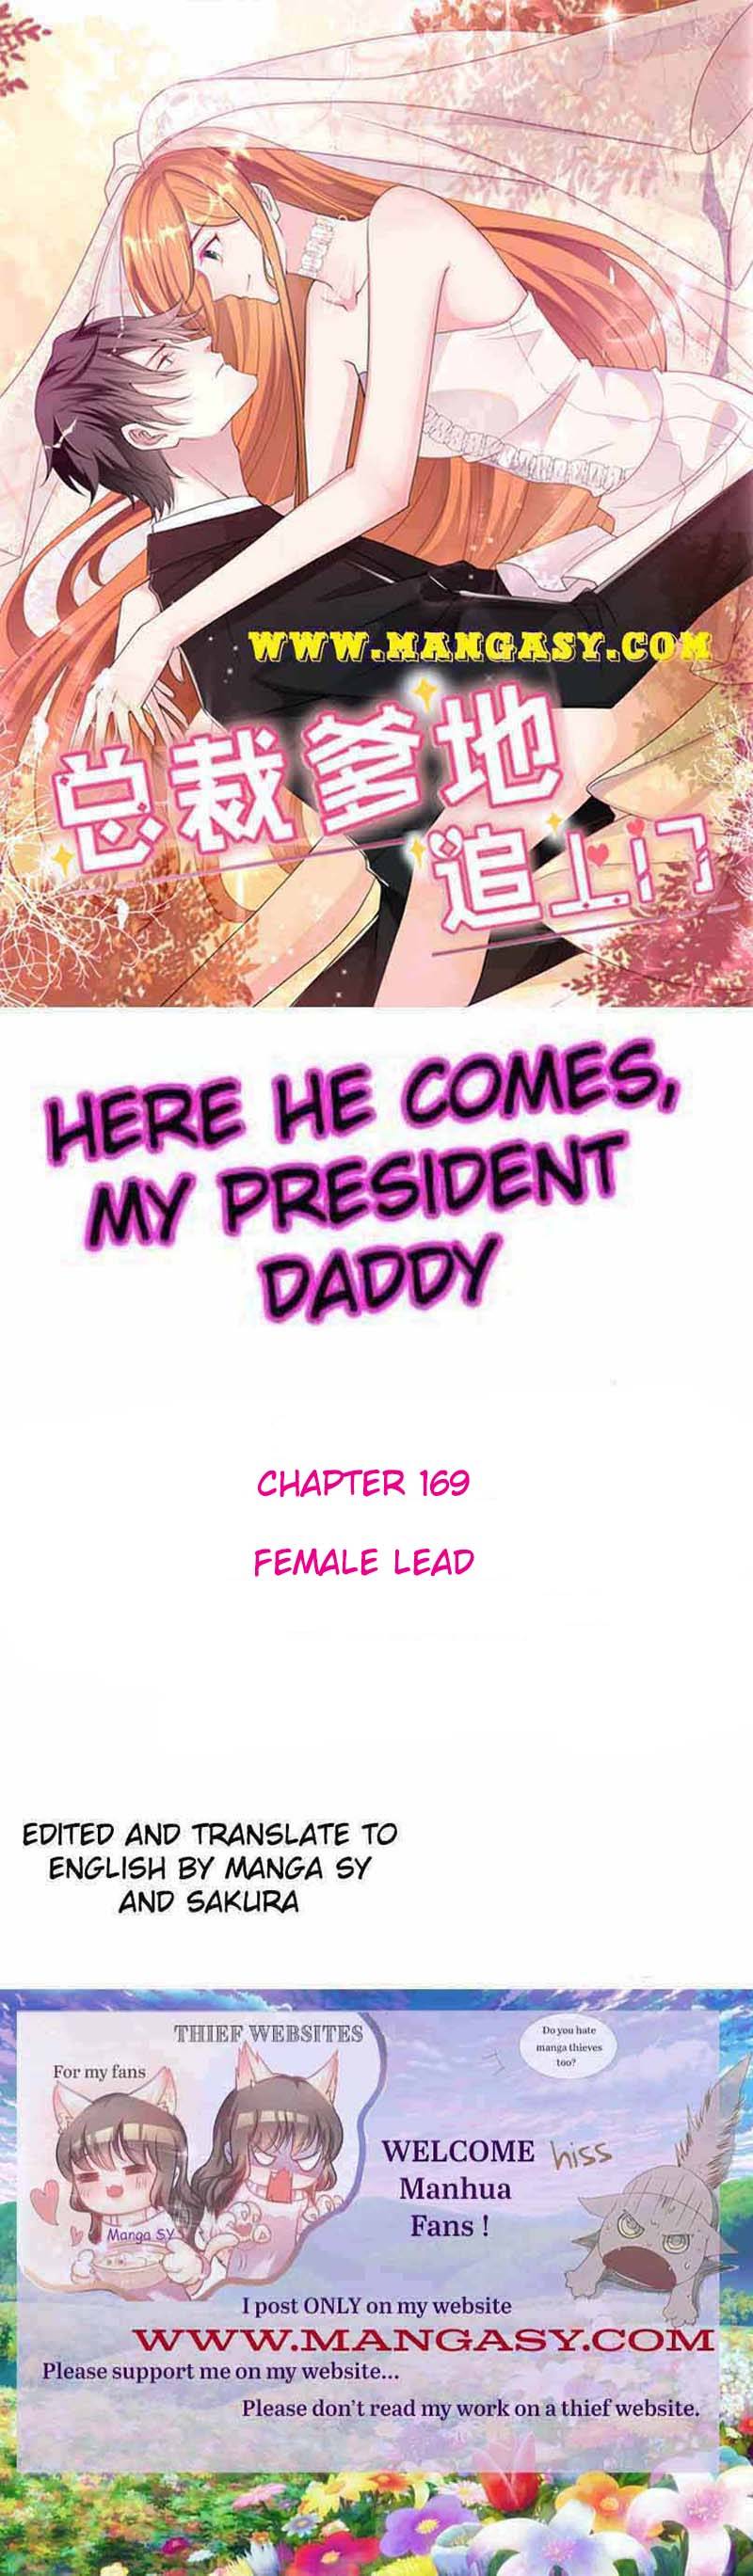 President daddy is chasing you Chapter 169 - page 1